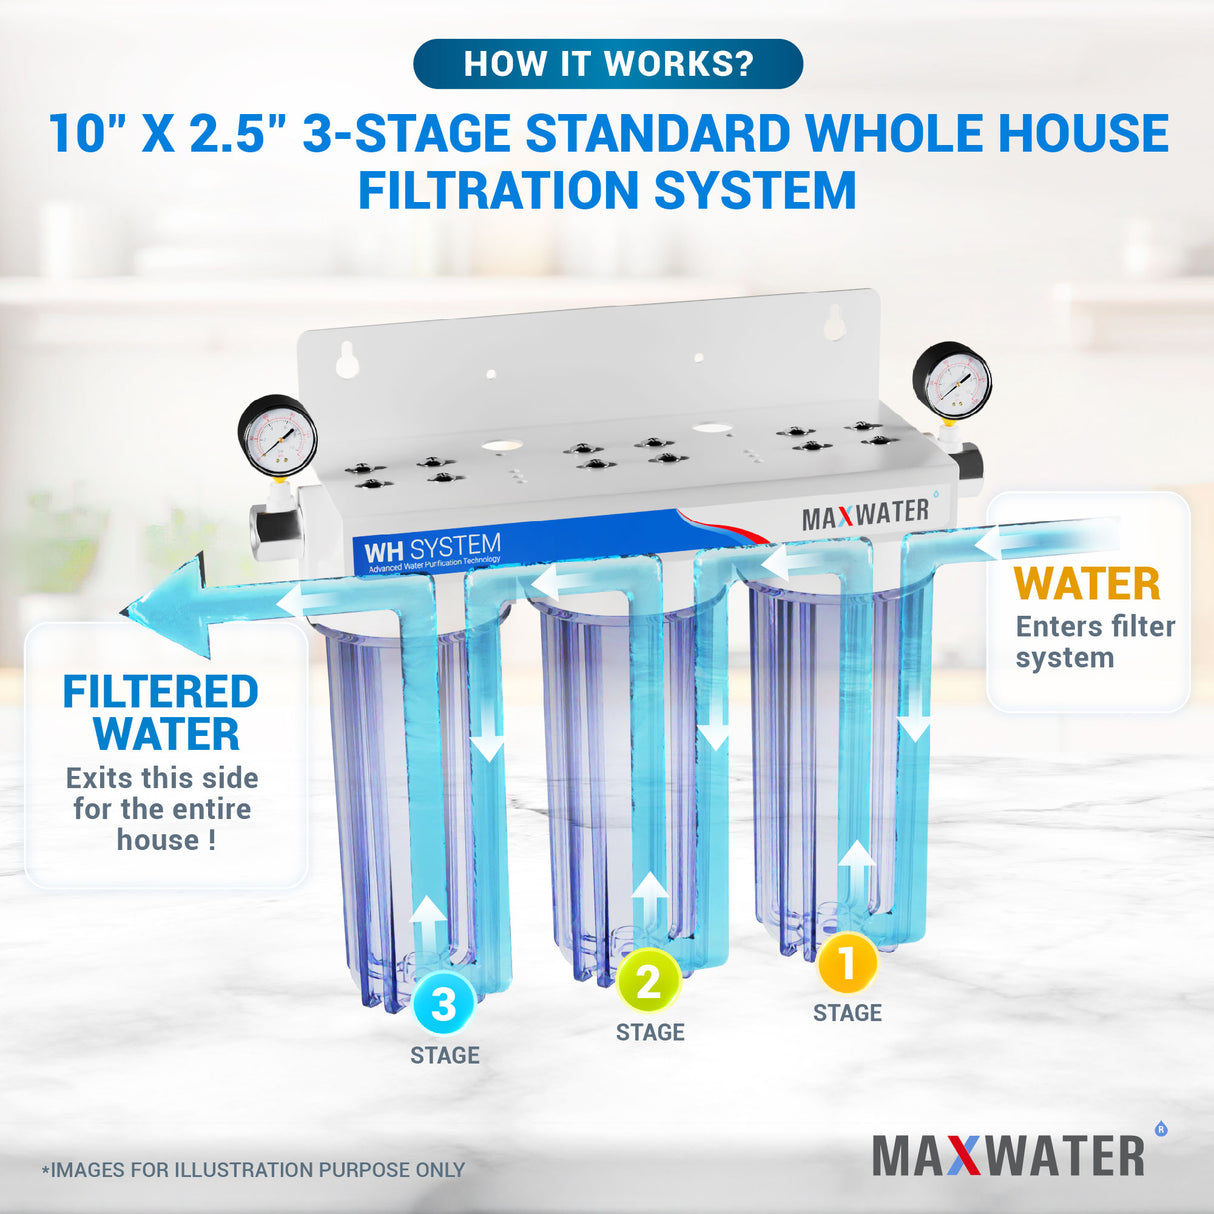 Efficient whole house water filter - 10' x 2.5' size with sediment, GAC, and CTO filtration